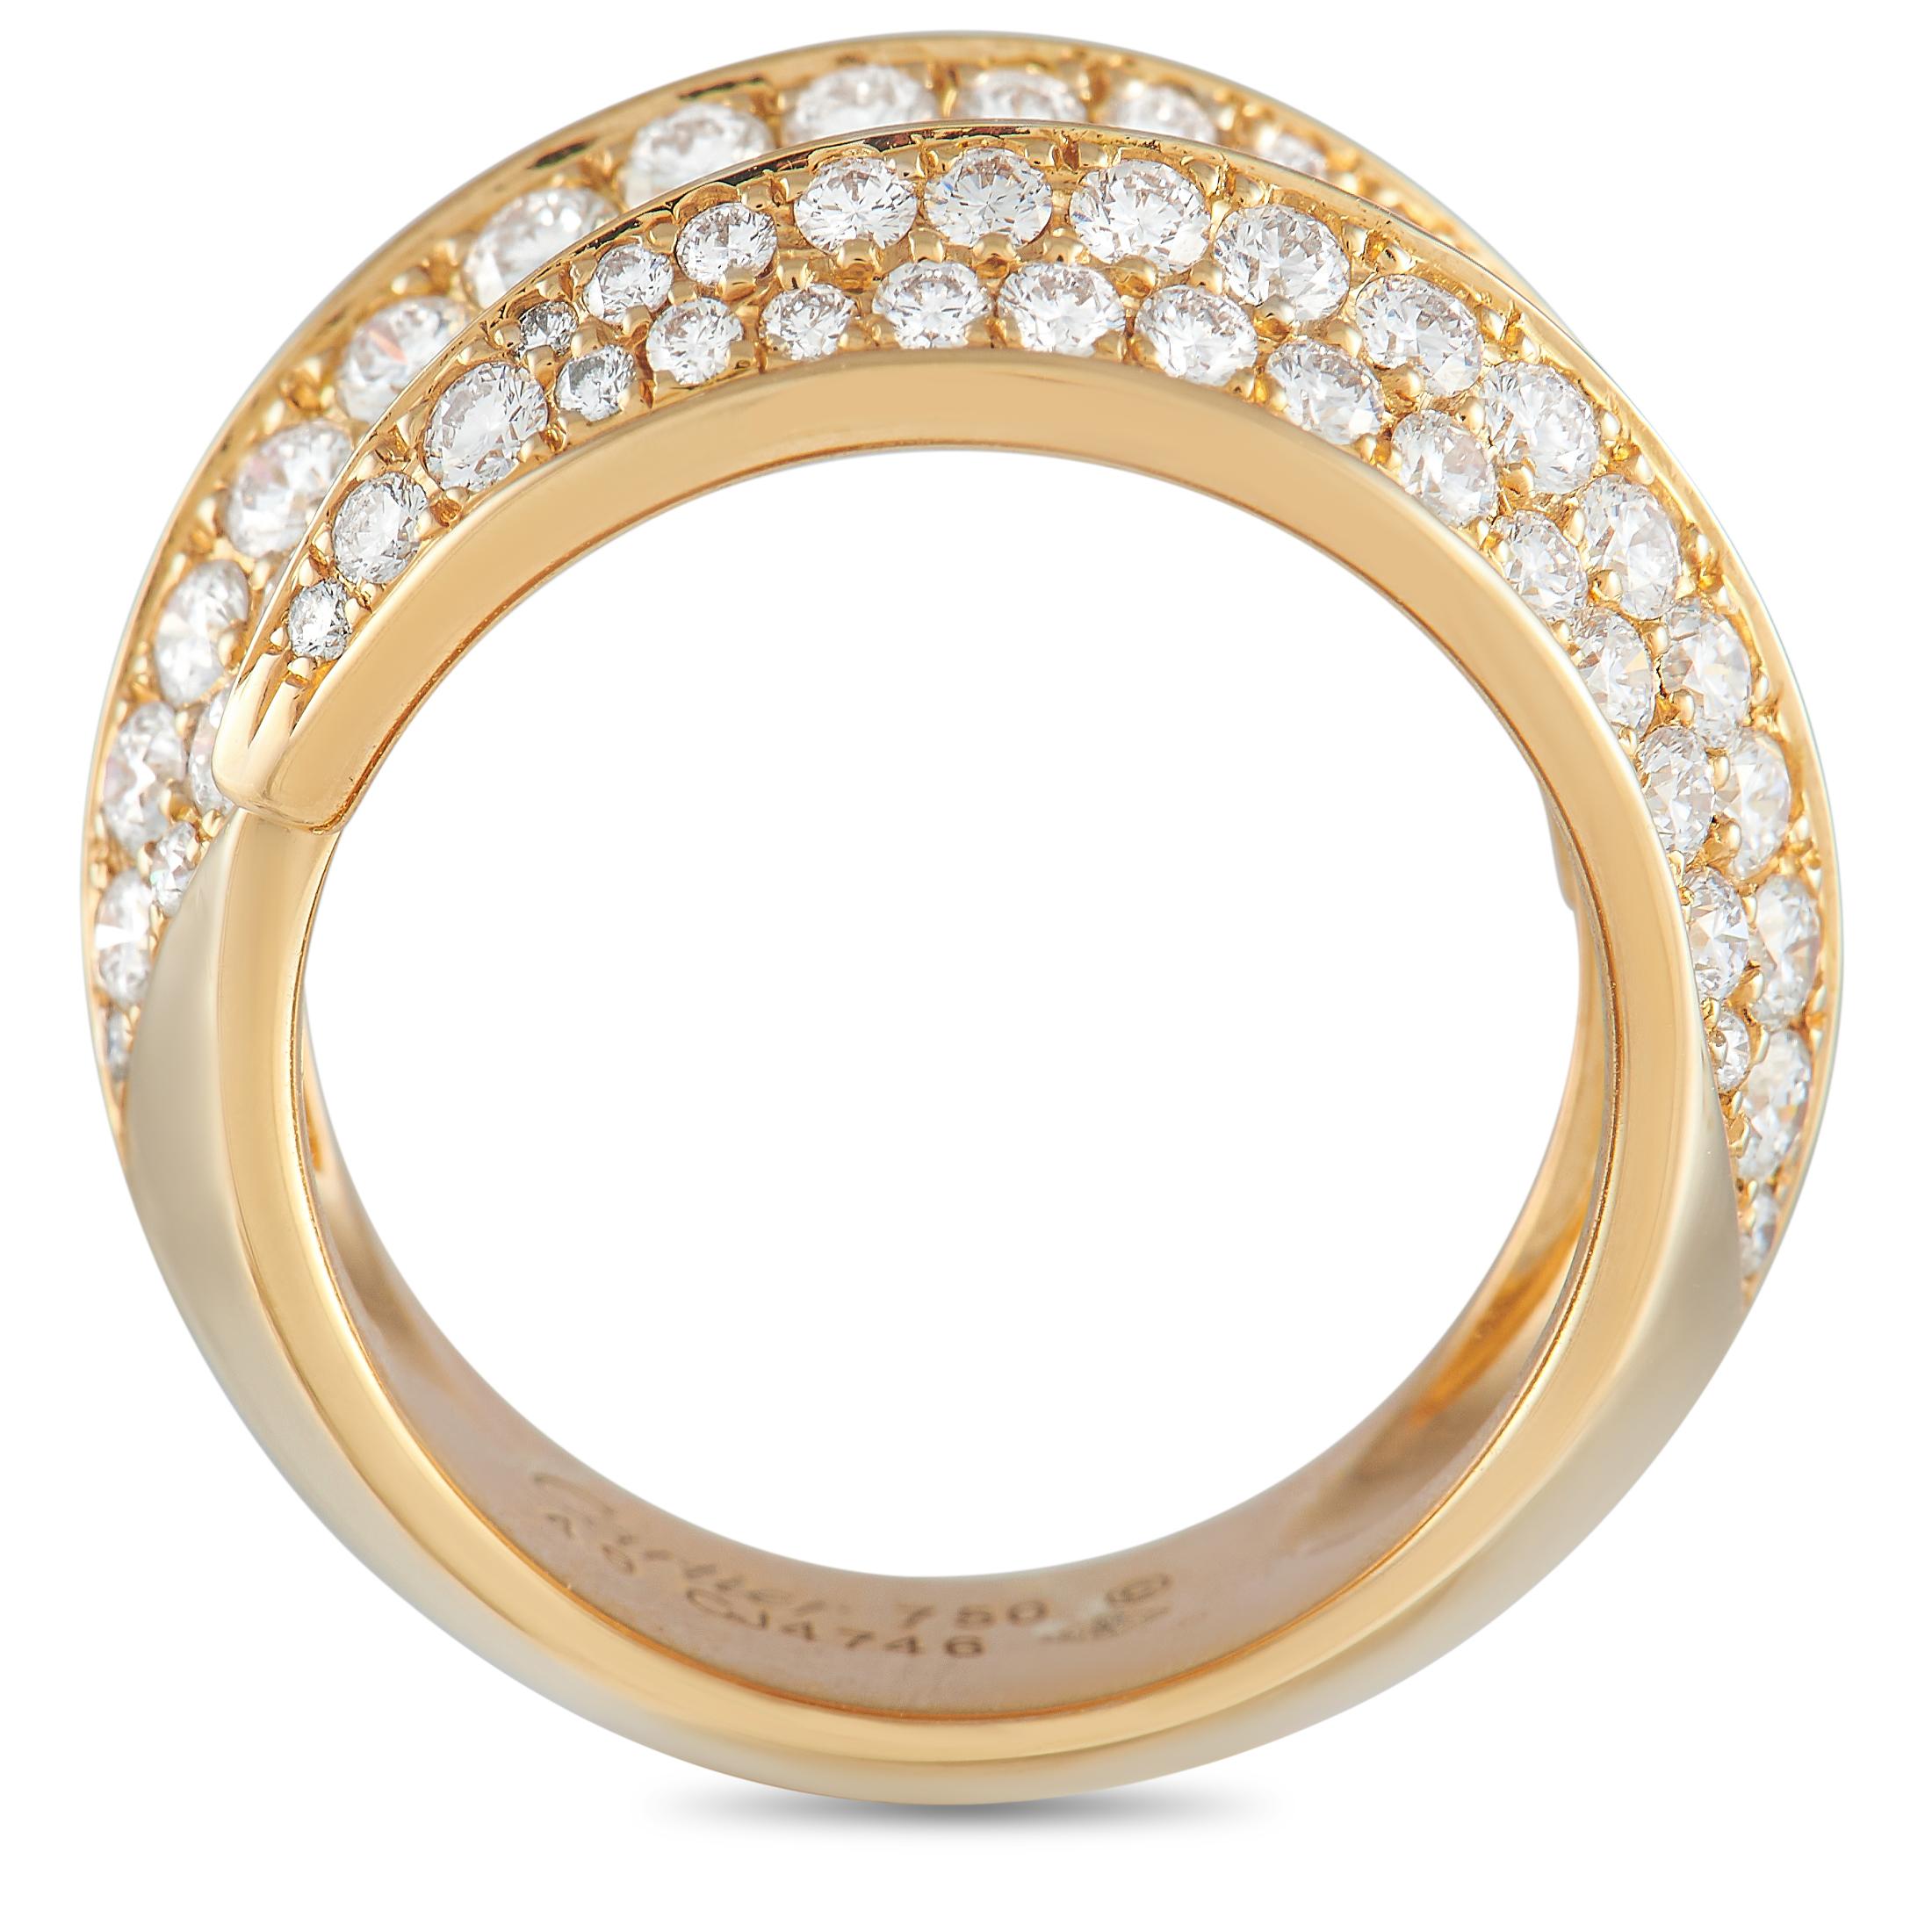 Clean lines and a minimalist 18K Yellow Gold setting provide this Cartier Griffe ring with a graceful sense of movement. Adorned with inset diamonds totaling 1.0 carats, this timeless piece features a 10mm wide band and a 6mm top height. 